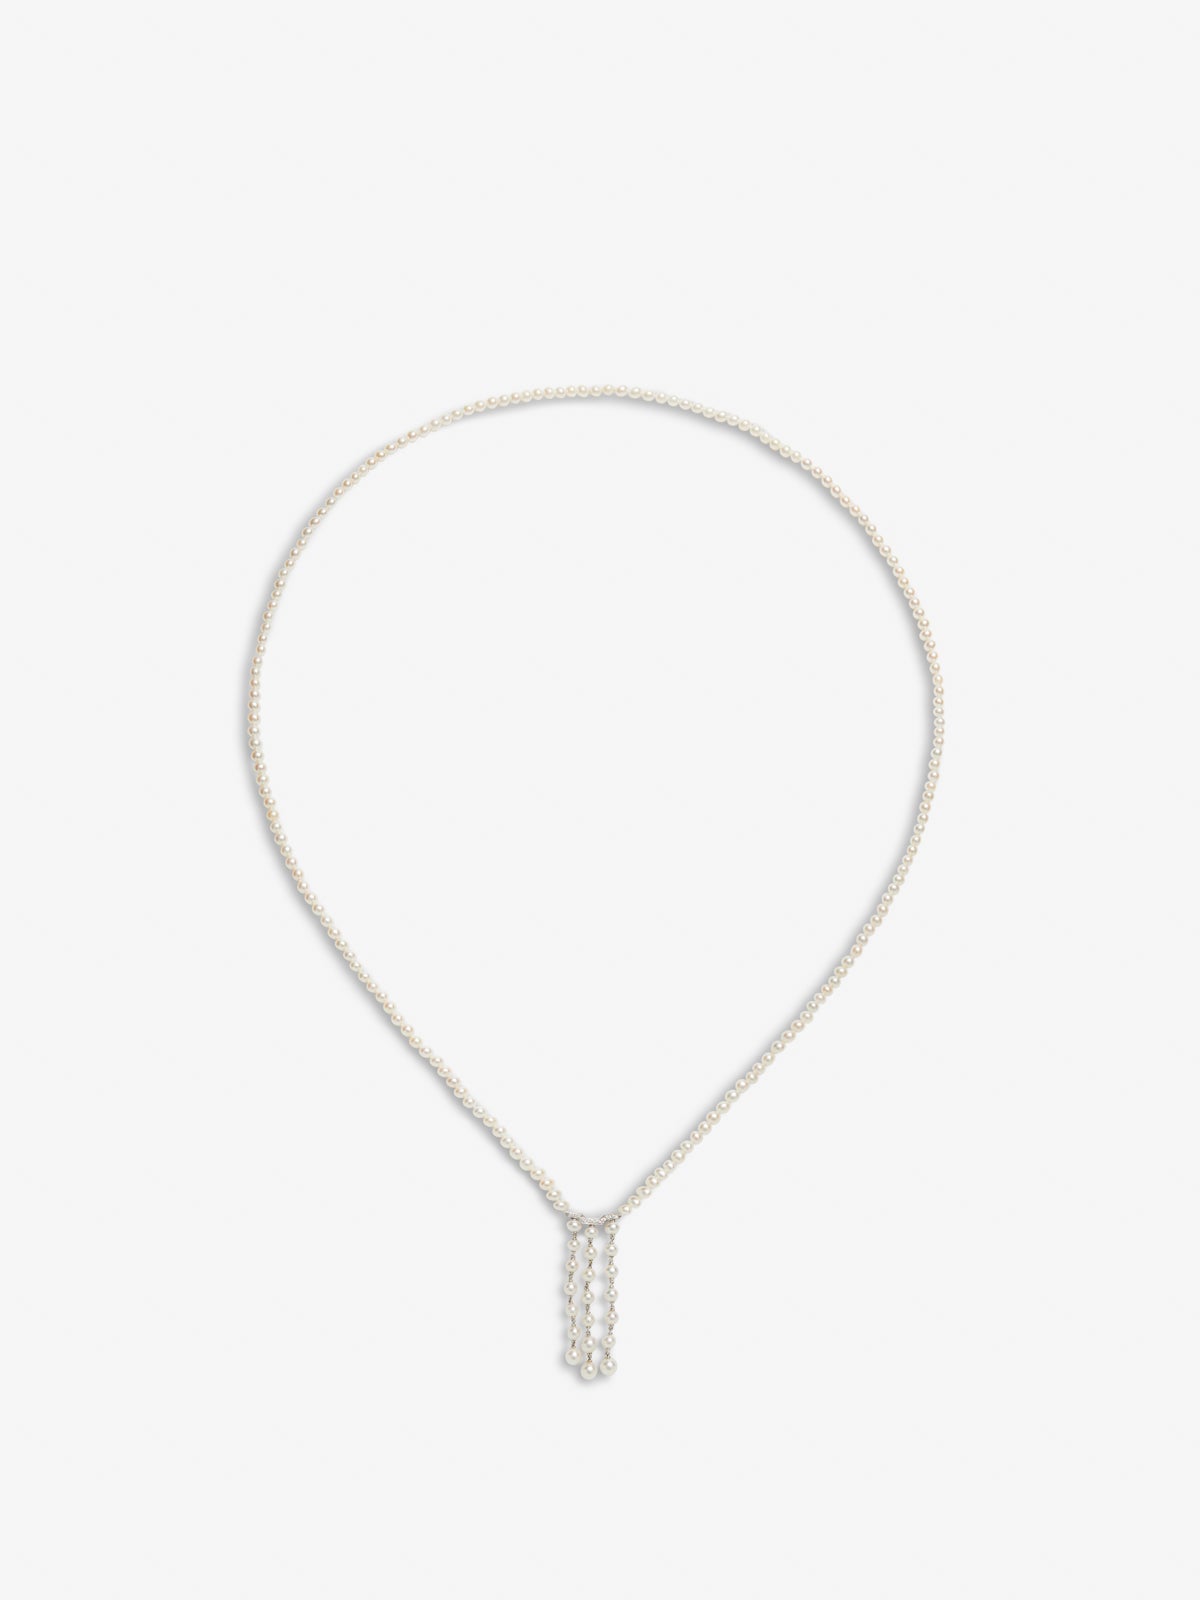 18K white gold pendant with akoya pearls and 0.09 ct brilliant-cut diamonds